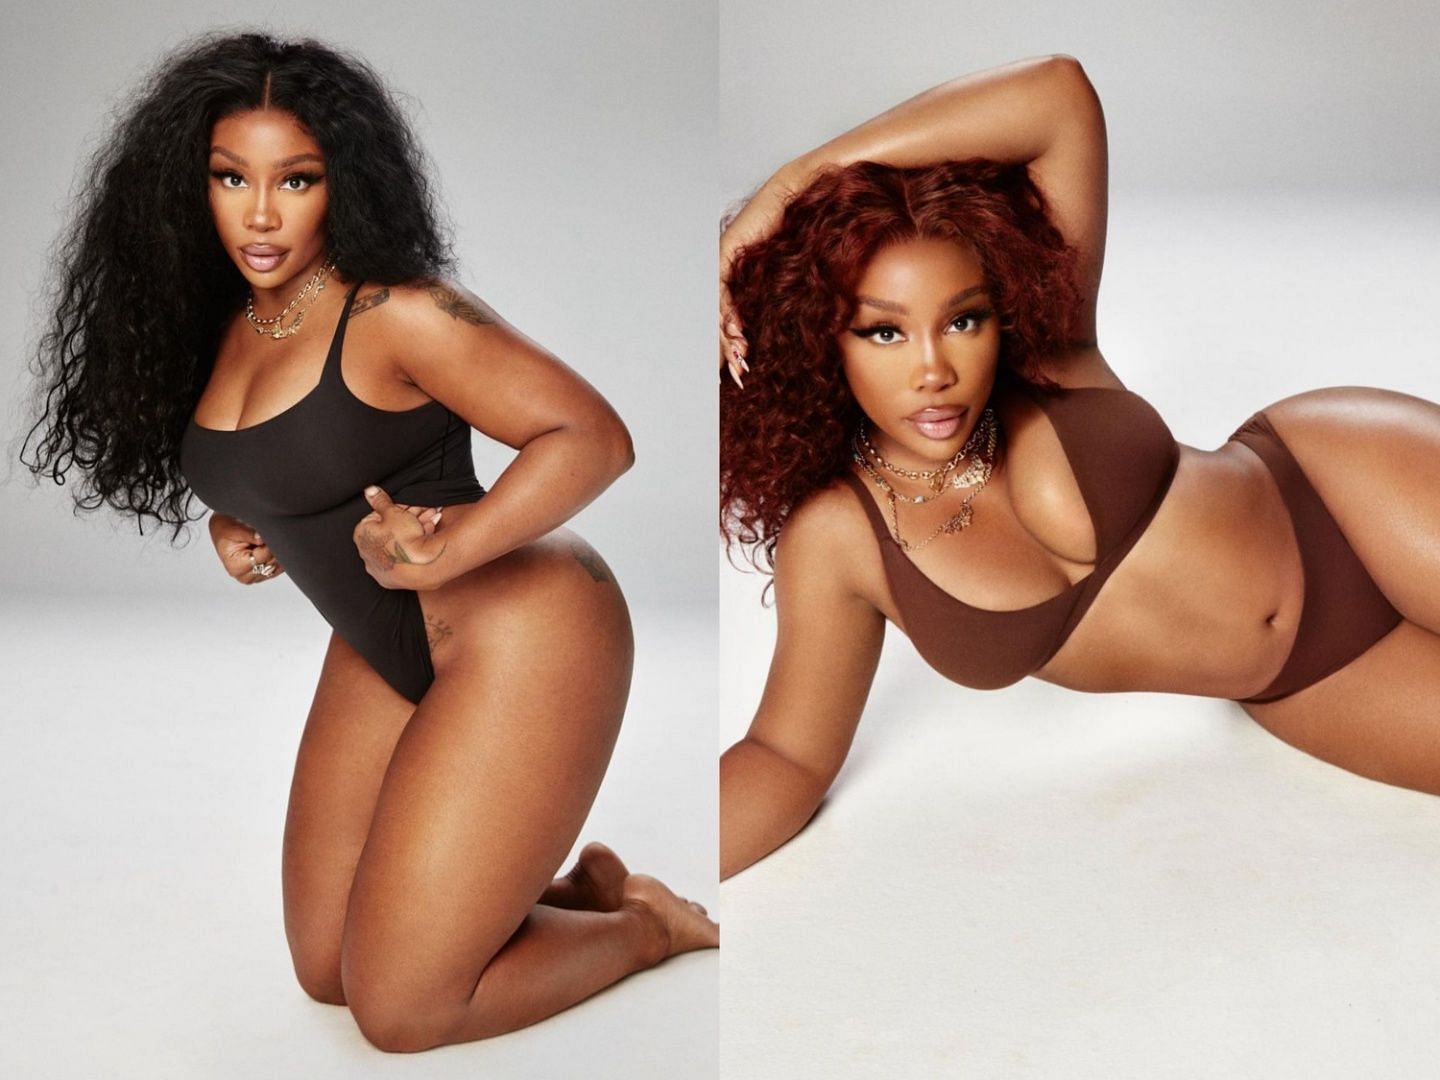 SZA opens up about her plastic surgery journey Enhancing confidence